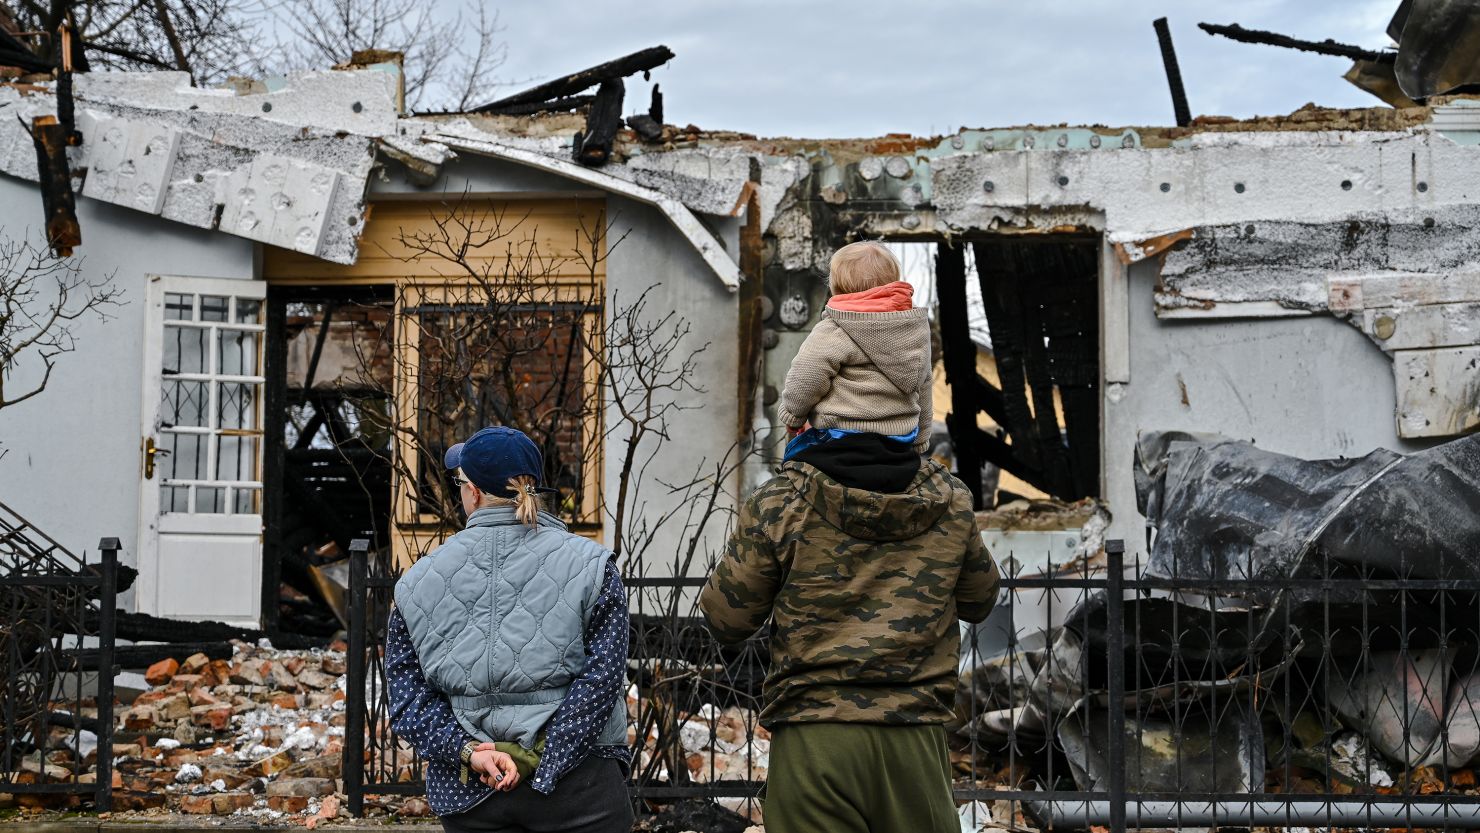 A woman and a man, with a boy on his shoulders, are looking at the ruins of the museum of Roman Shukhevych, the military leader of the Ukrainian Insurgent Army (UPA), following a Russian drone attack in Bilohorshcha on the outskirts of Lviv, Western Ukraine, on January 1, 2024. Preliminary reports indicate that 10 Russian Shahed drones attacked the Lviv community on New Year's Eve, with falling debris from a Russian drone causing a fire at the Shukhevych Museum. NO USE RUSSIA. NO USE BELARUS. (Photo by Ukrinform/NurPhoto via Getty Images)